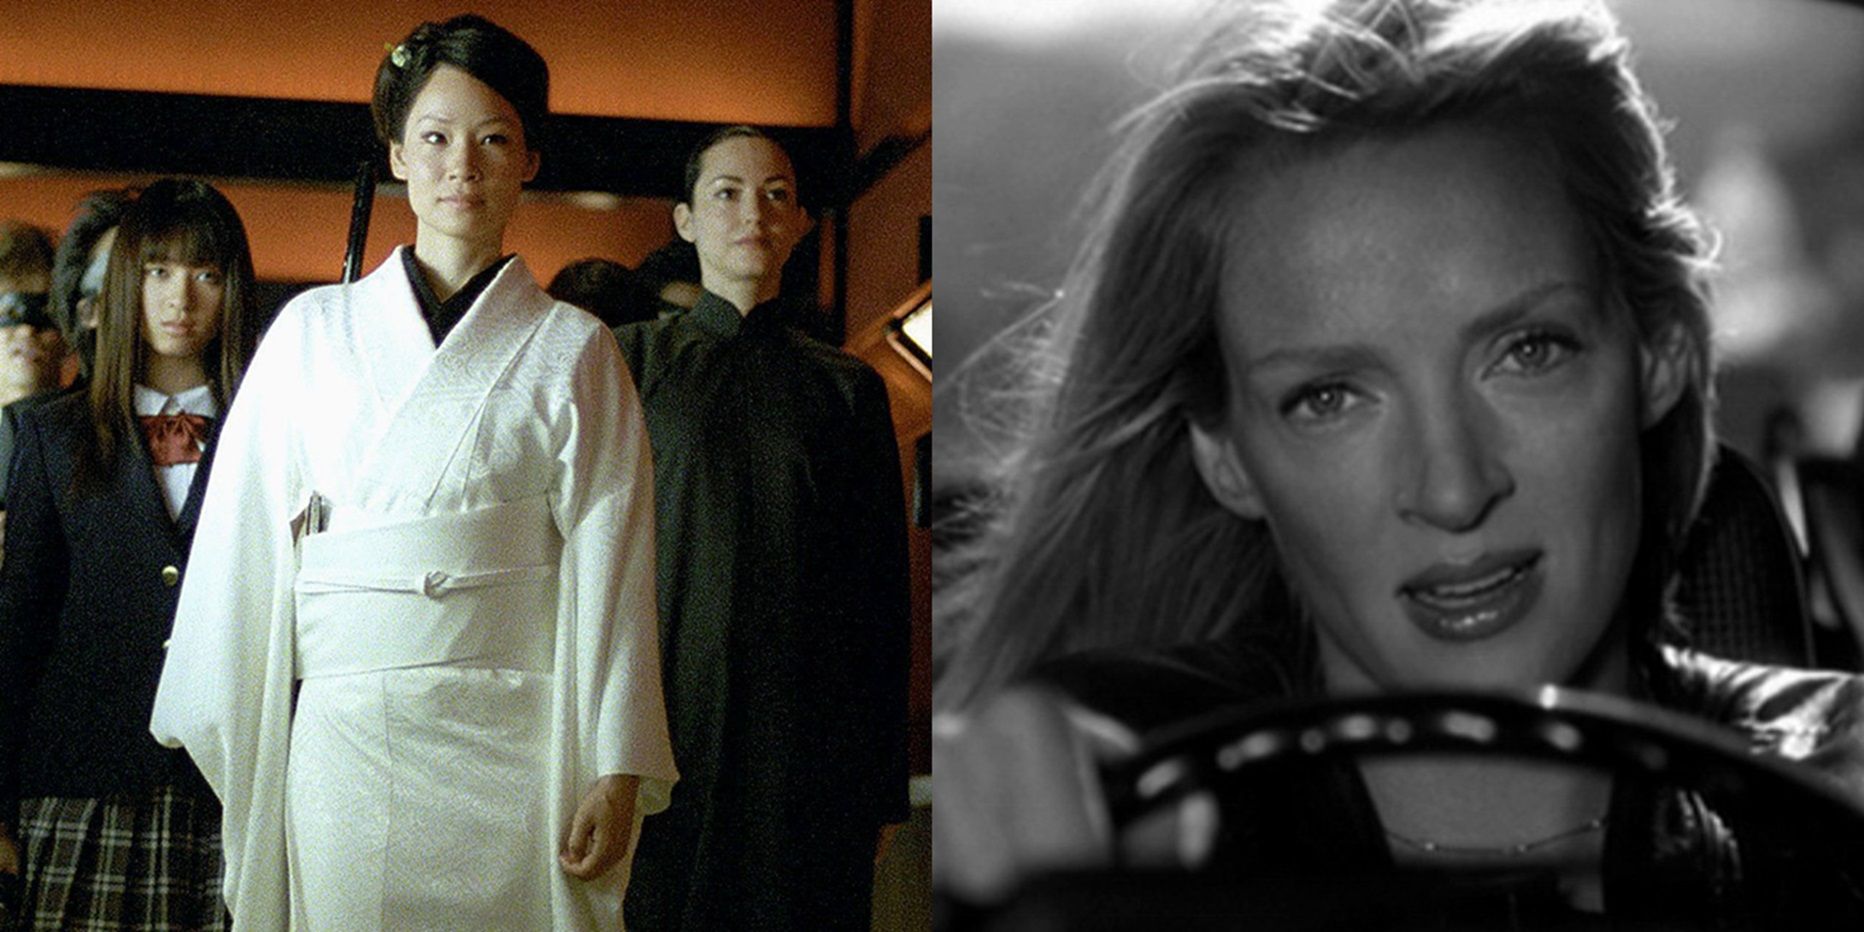 Kill Bill The 5 Best Musical Moments In Volume 1 (& 5 In Volume 2)